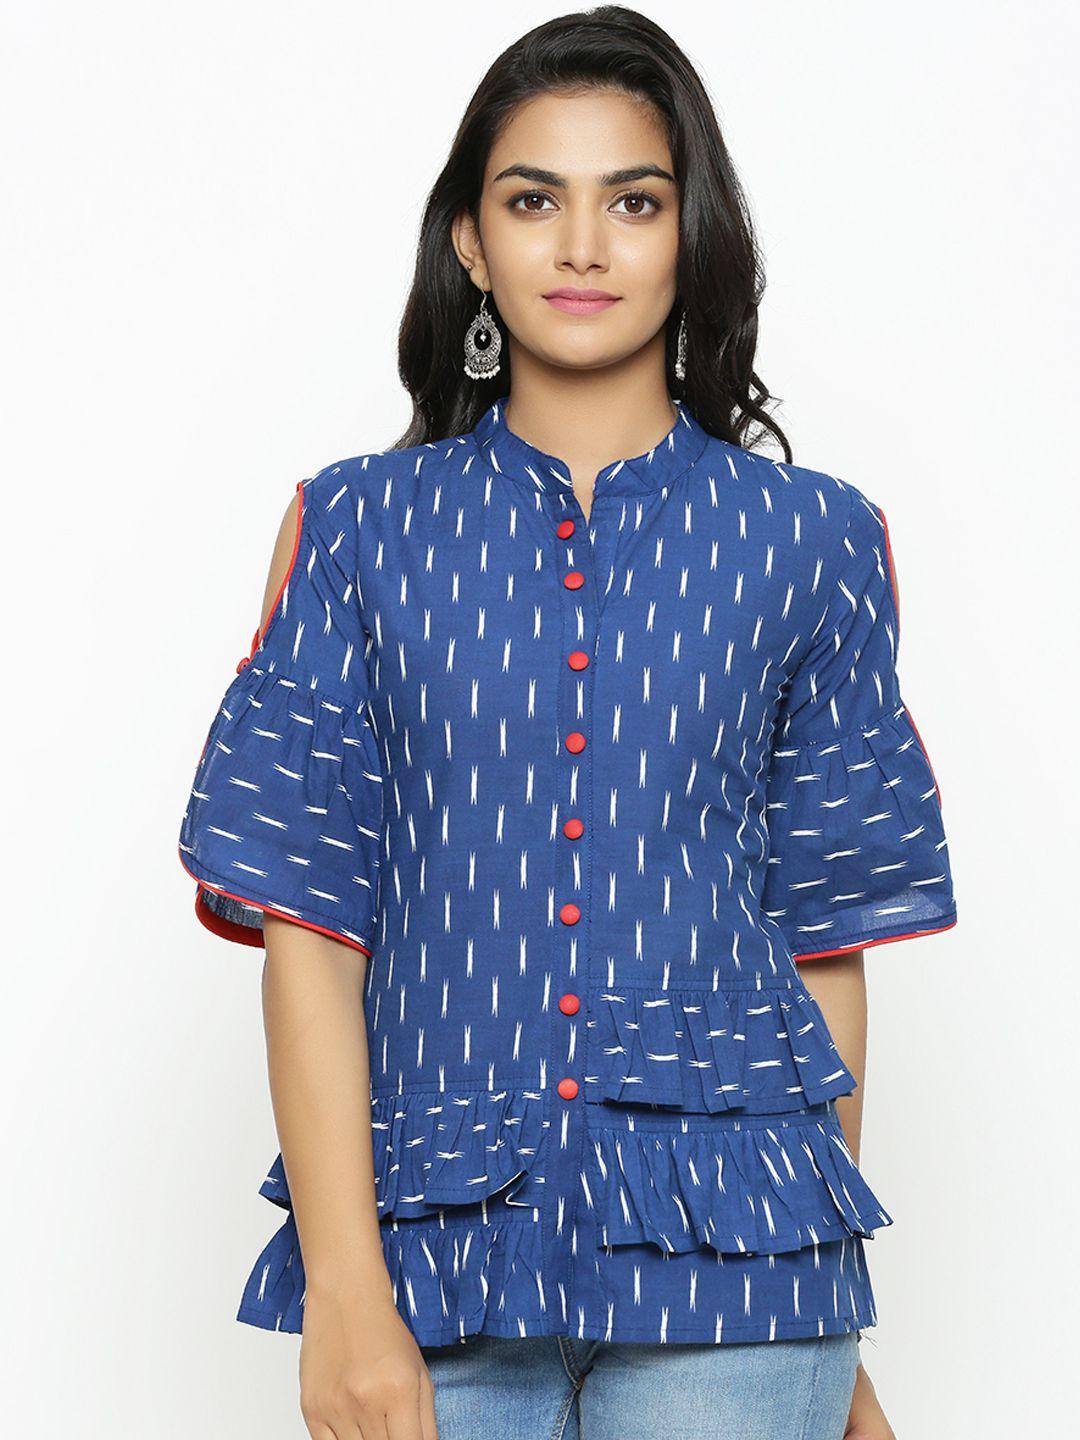 yash-gallery-women-blue-printed-tiered-top